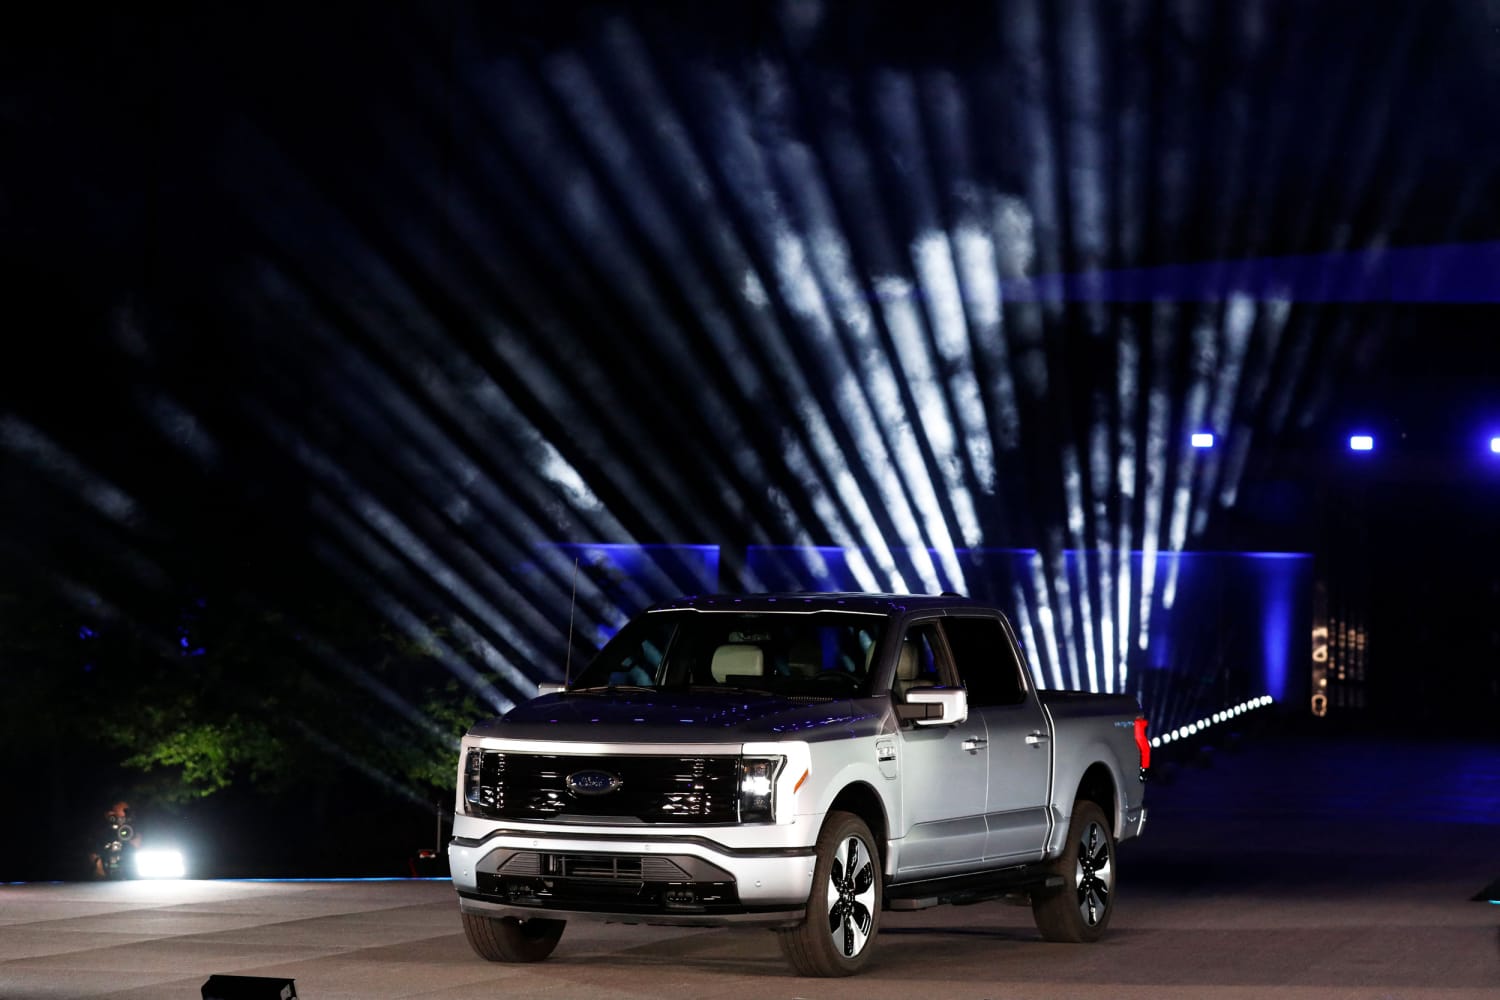 To reach ‘mainstream heartland America,’ Ford takes gamble on electric pickup truck